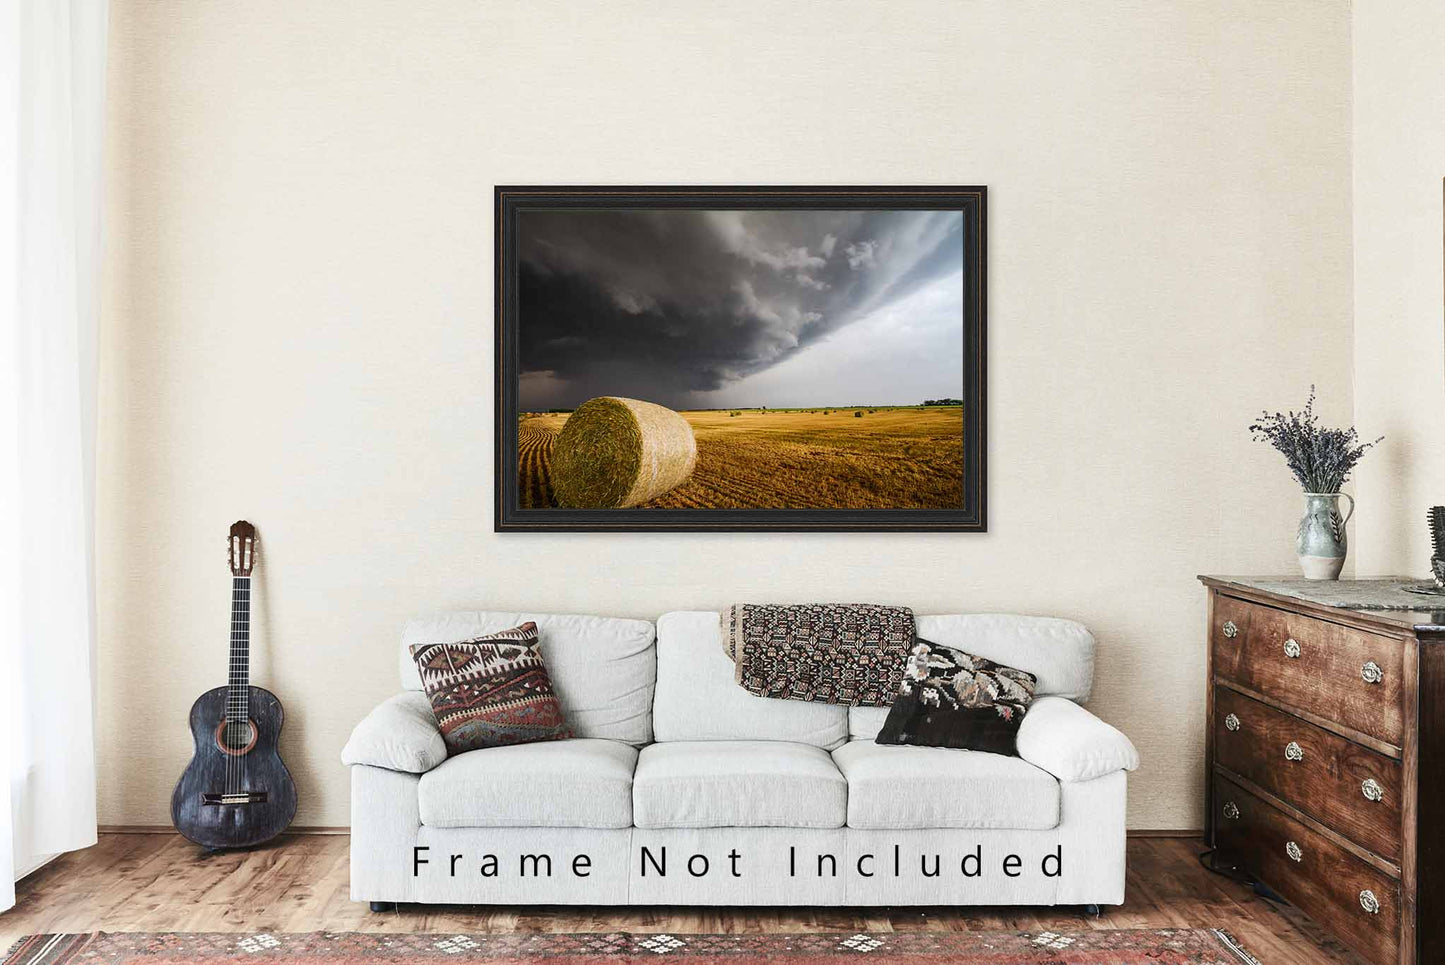 Country Picture - Fine Art Farm Photography Print of Round Hay Bale in Field Under Storm in Kansas Rural Farmhouse Wall Art Photo Decor